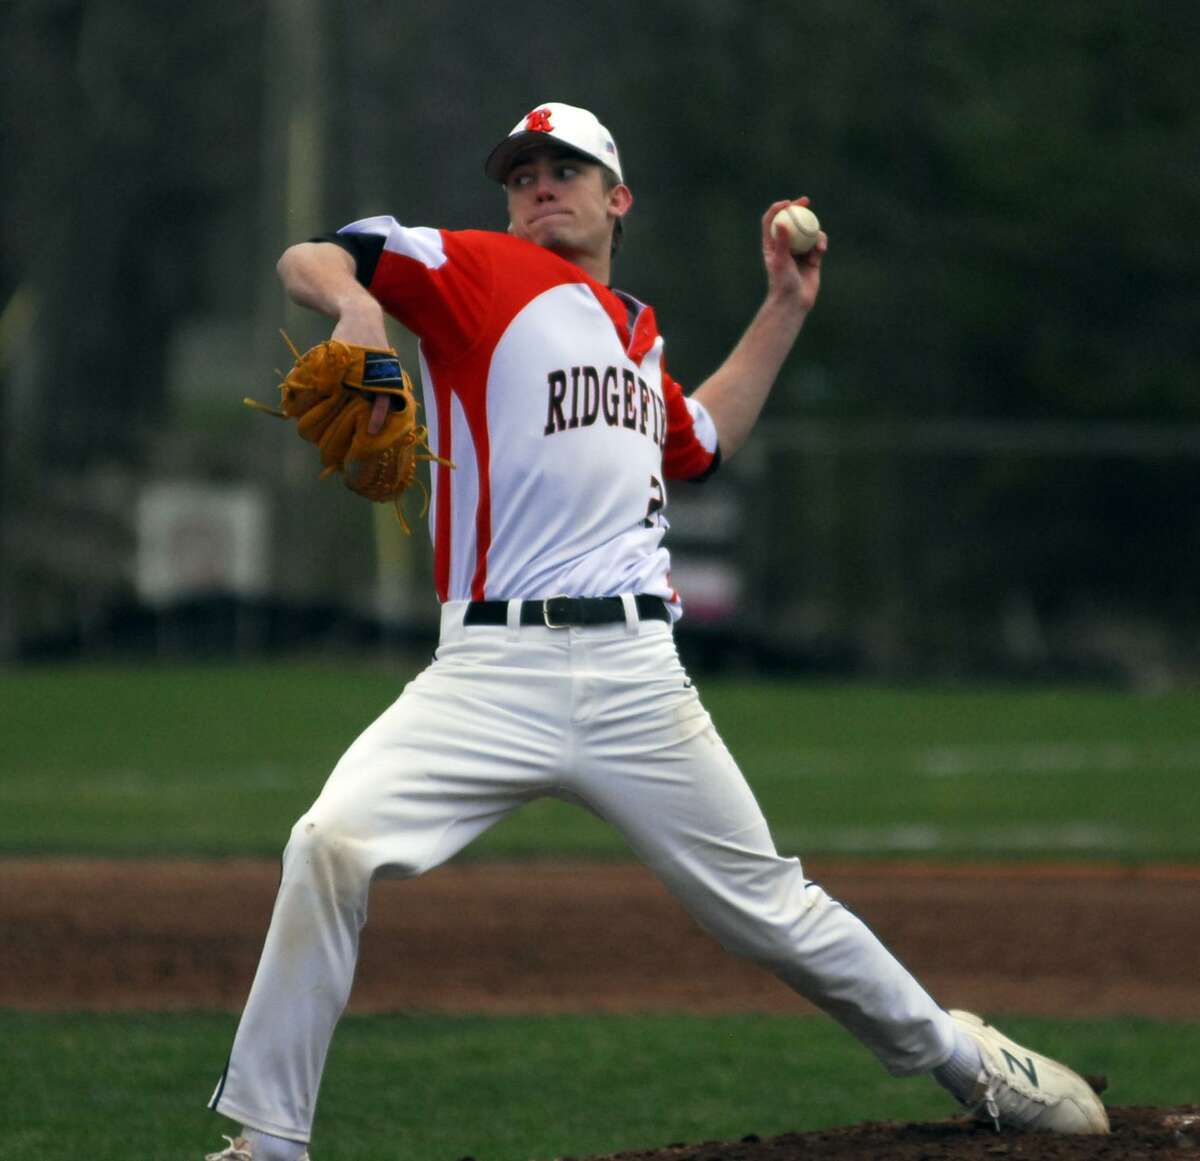 Ridgefield’s Alex Price tosses a pitch during a game against Danbury on Tuesday.